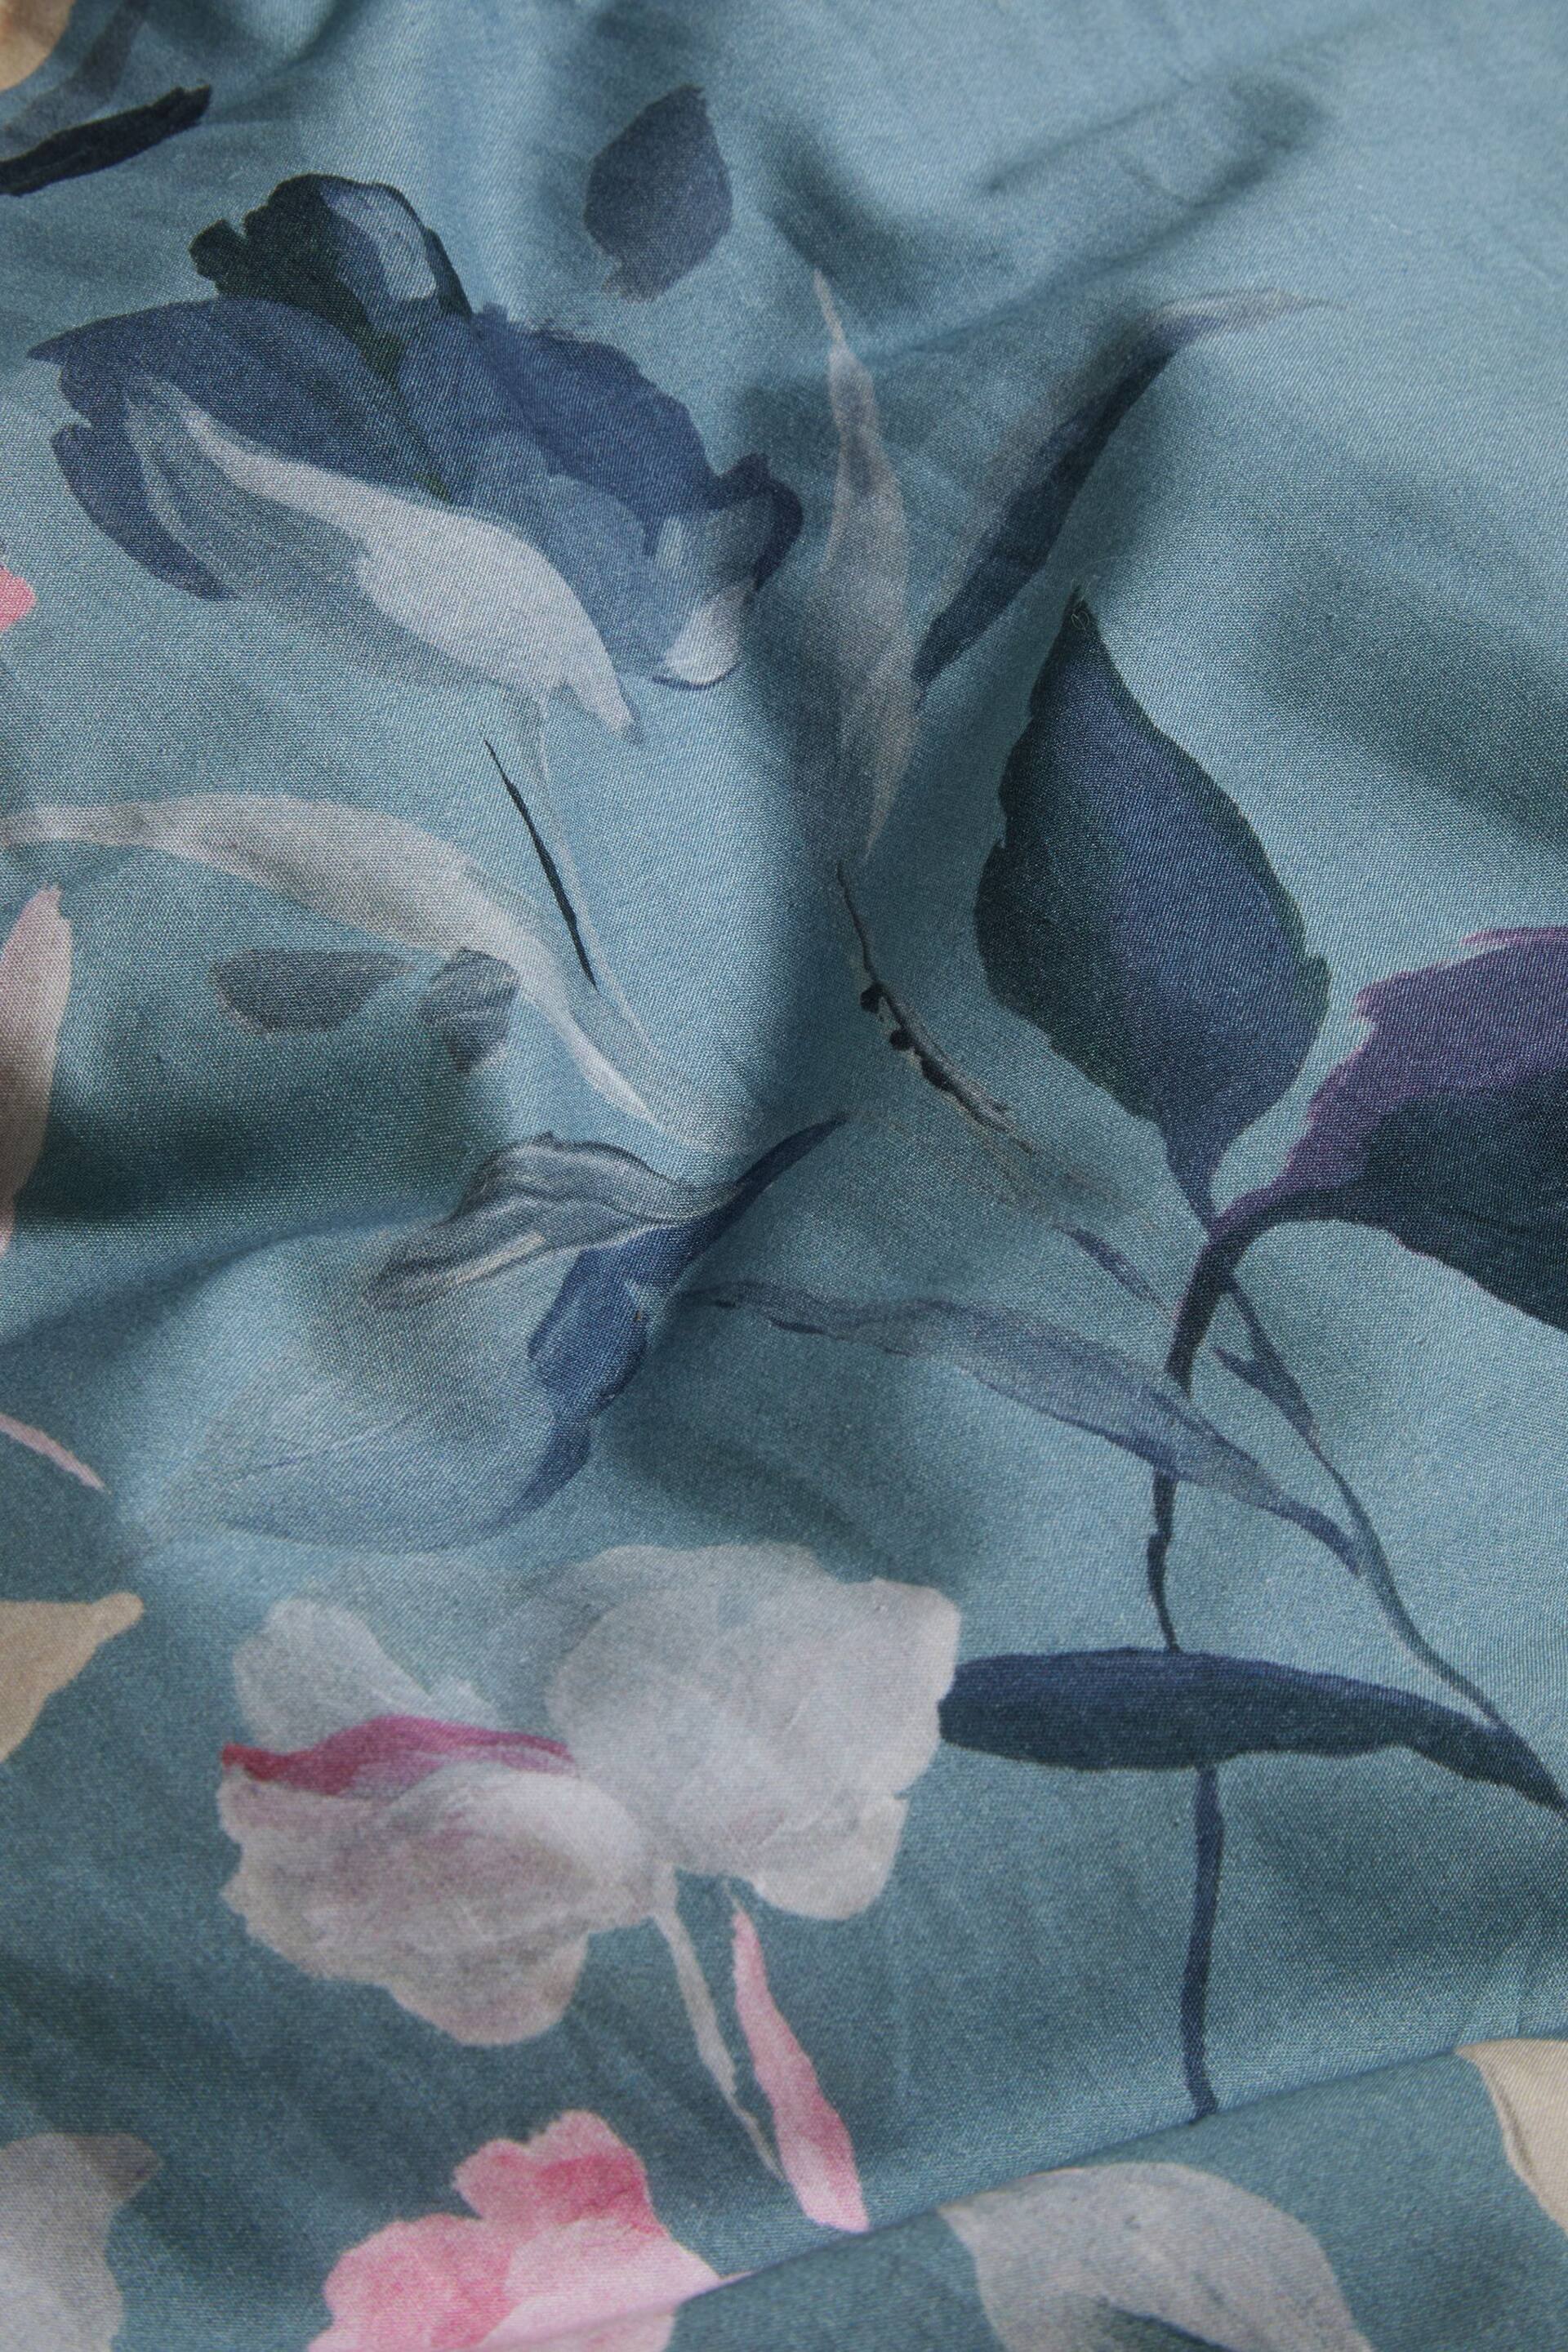 Blue/White Floral Oxford Edge Reversible 100% Cotton Duvet Cover and Pillowcase Set - Image 4 of 5